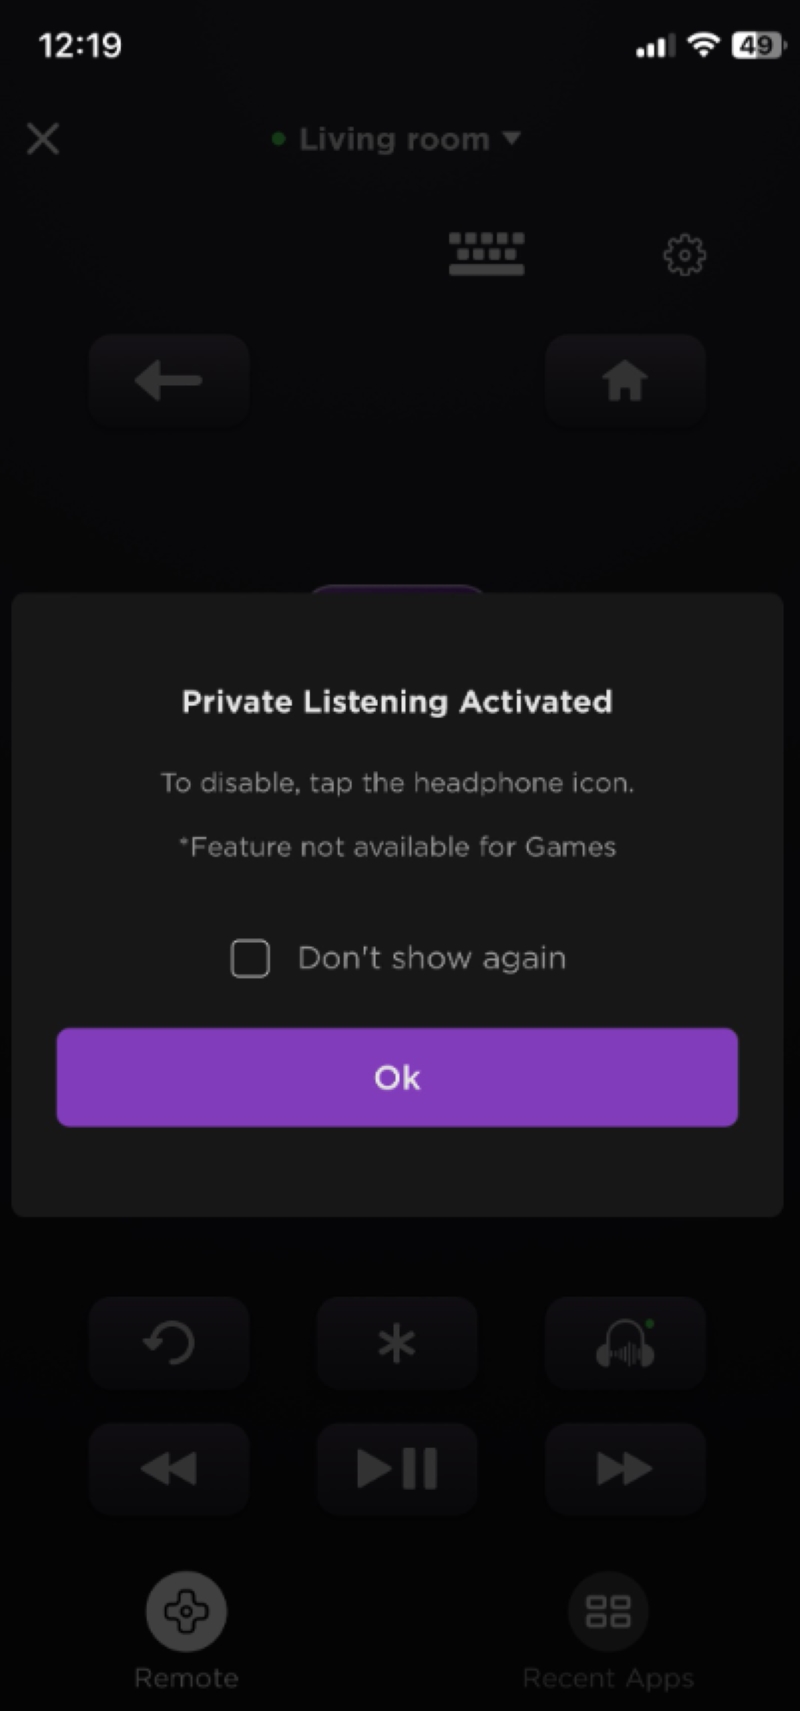 Private Listening activated message on the Roku mobile app